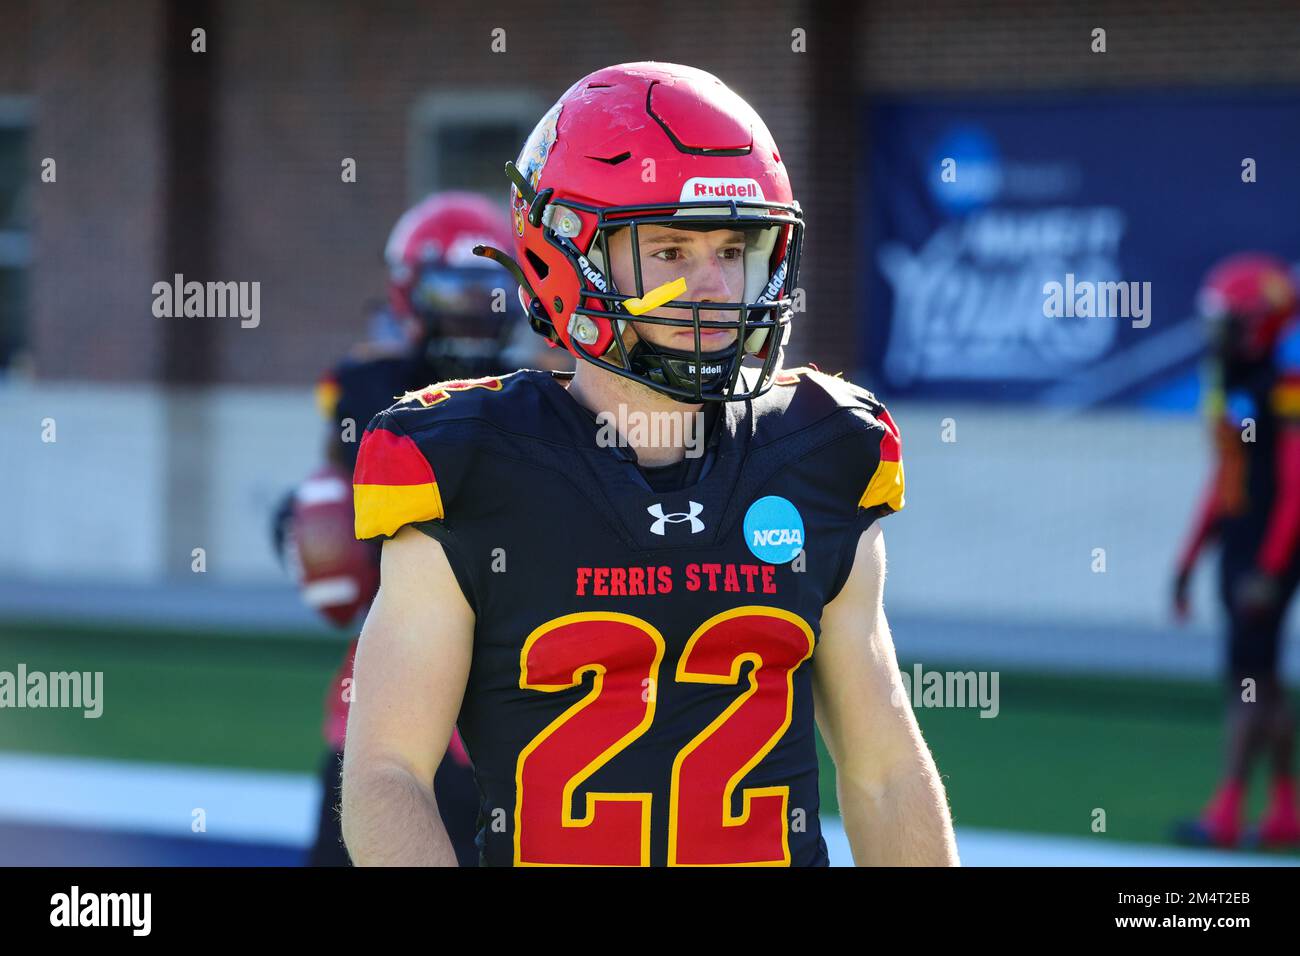 Ferris State Bulldogs Brady Rose (22) during warmup before the NCAA Division II national championship college football game, at McKinney ISD Stadium S Stock Photo